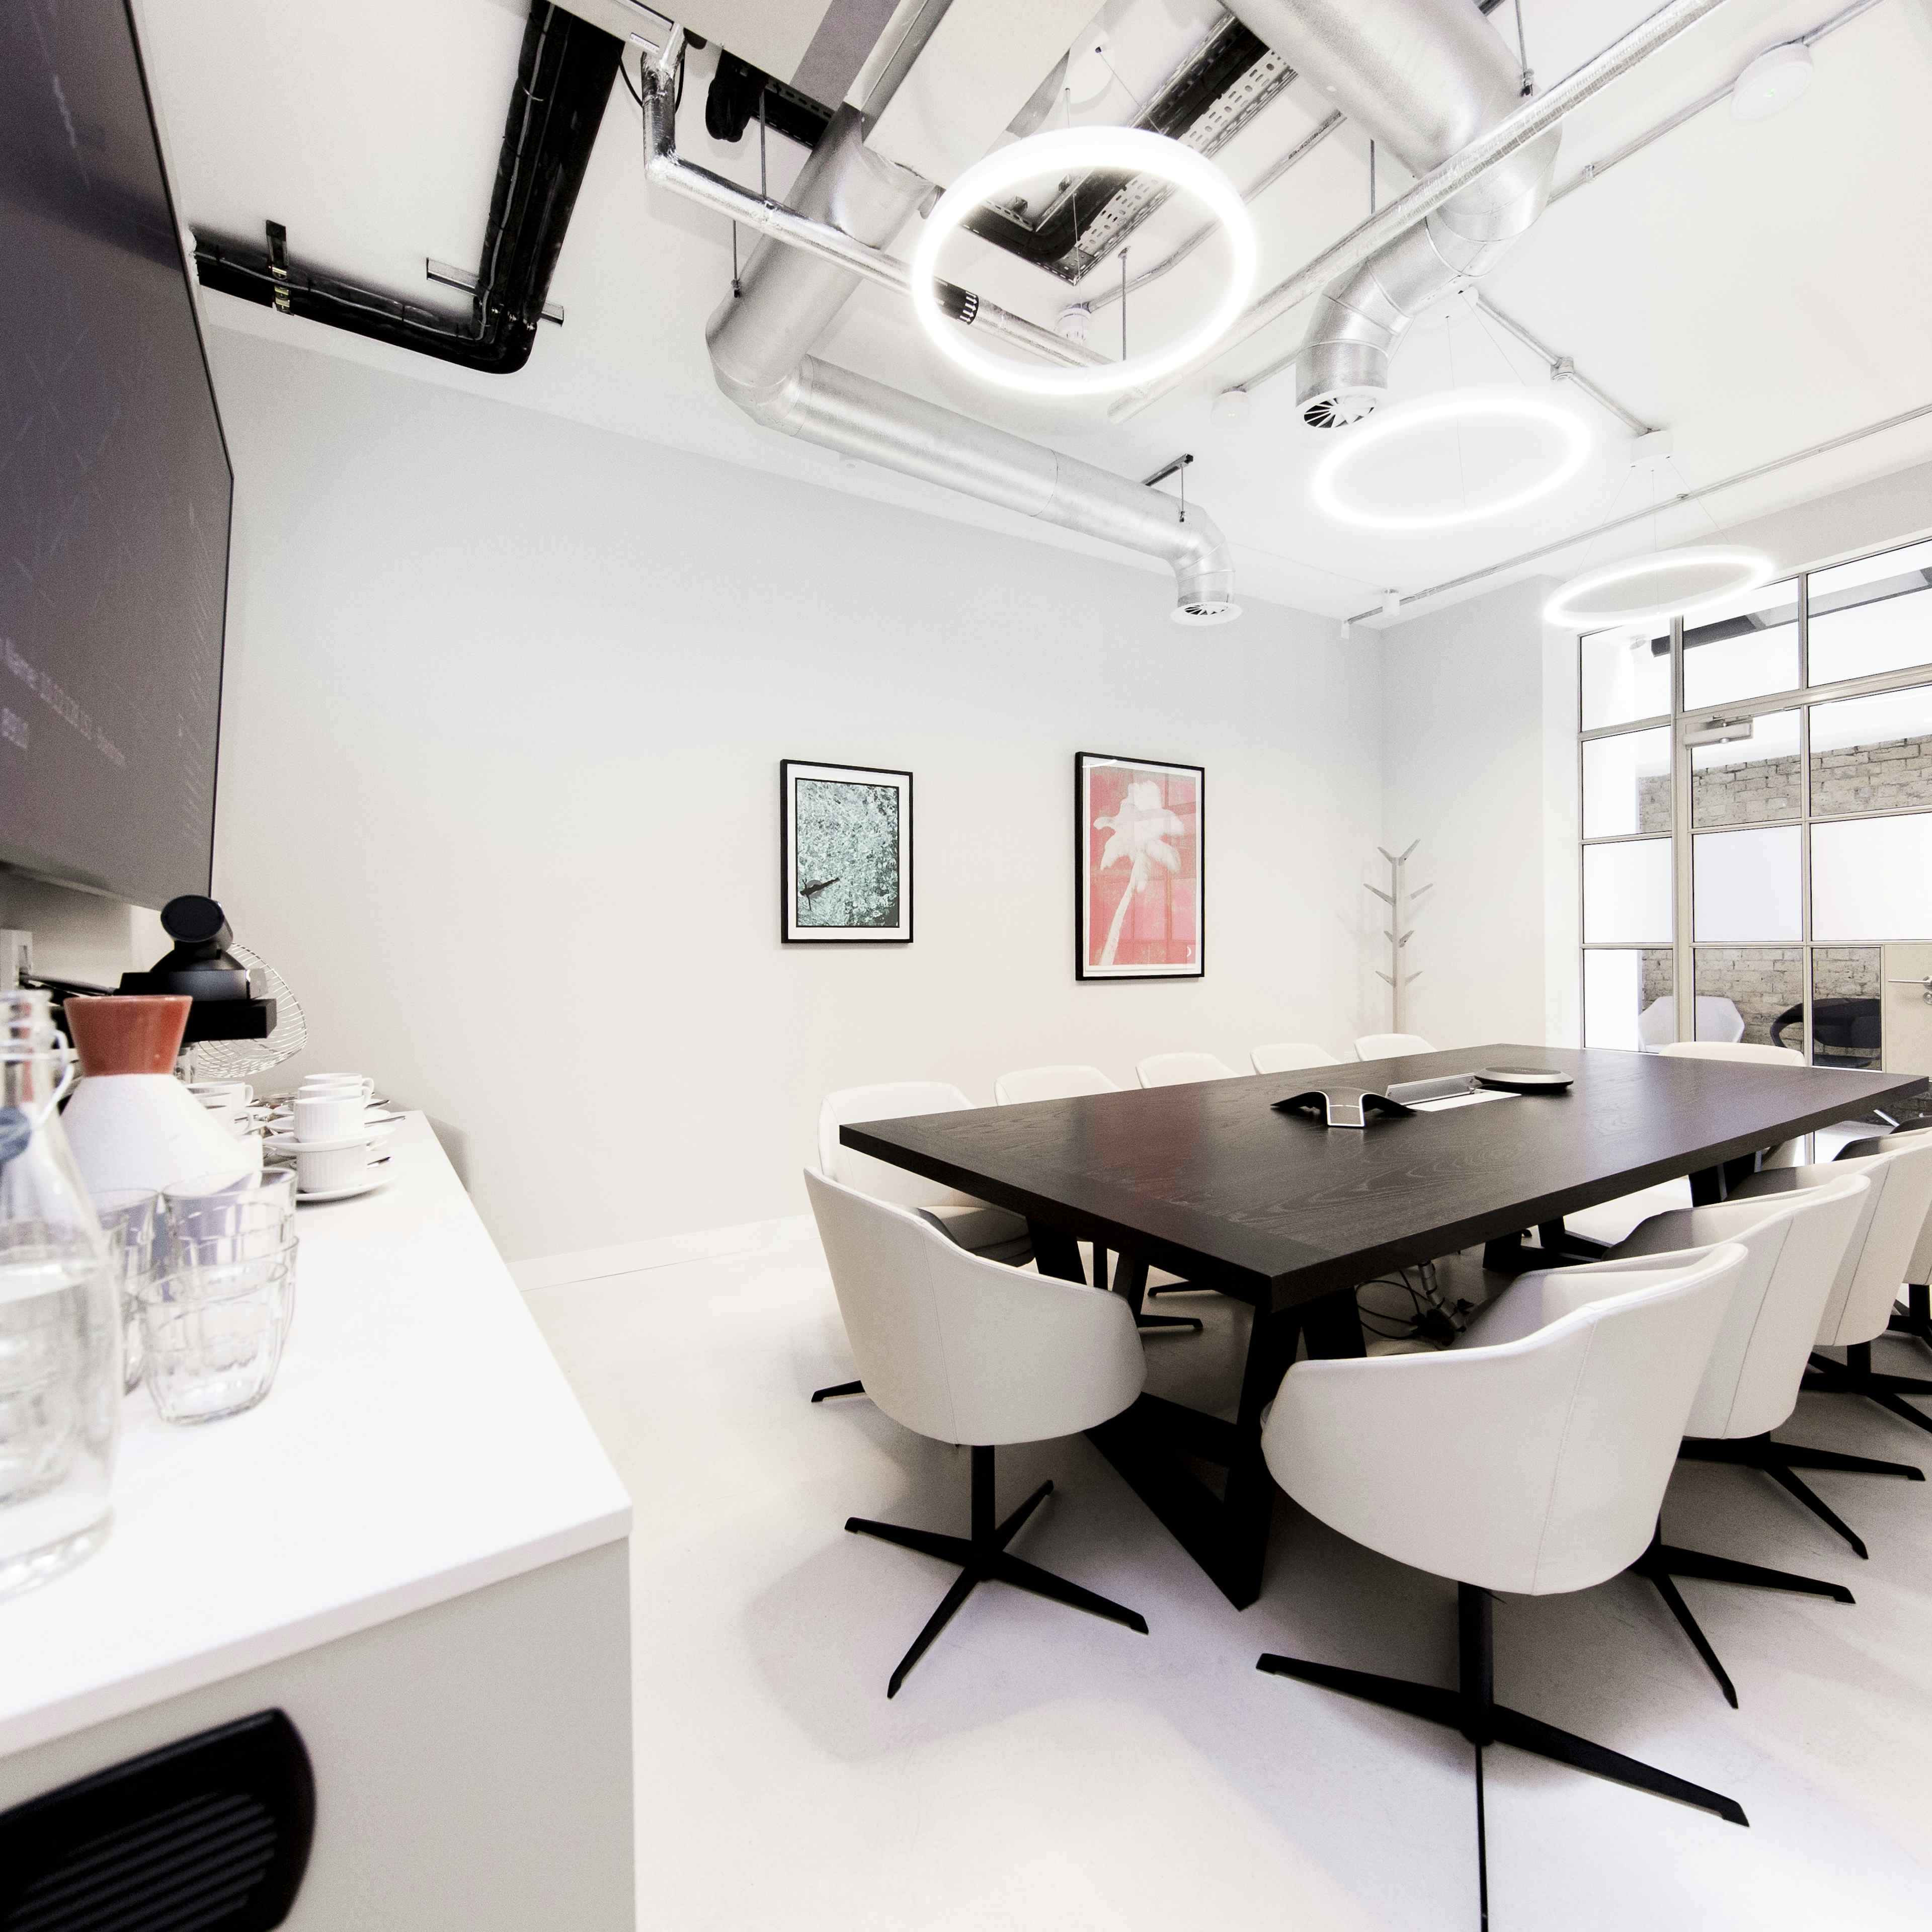 FORA- Clerkenwell, Dallington St, Gallery on 5 - The Boardroom image 2